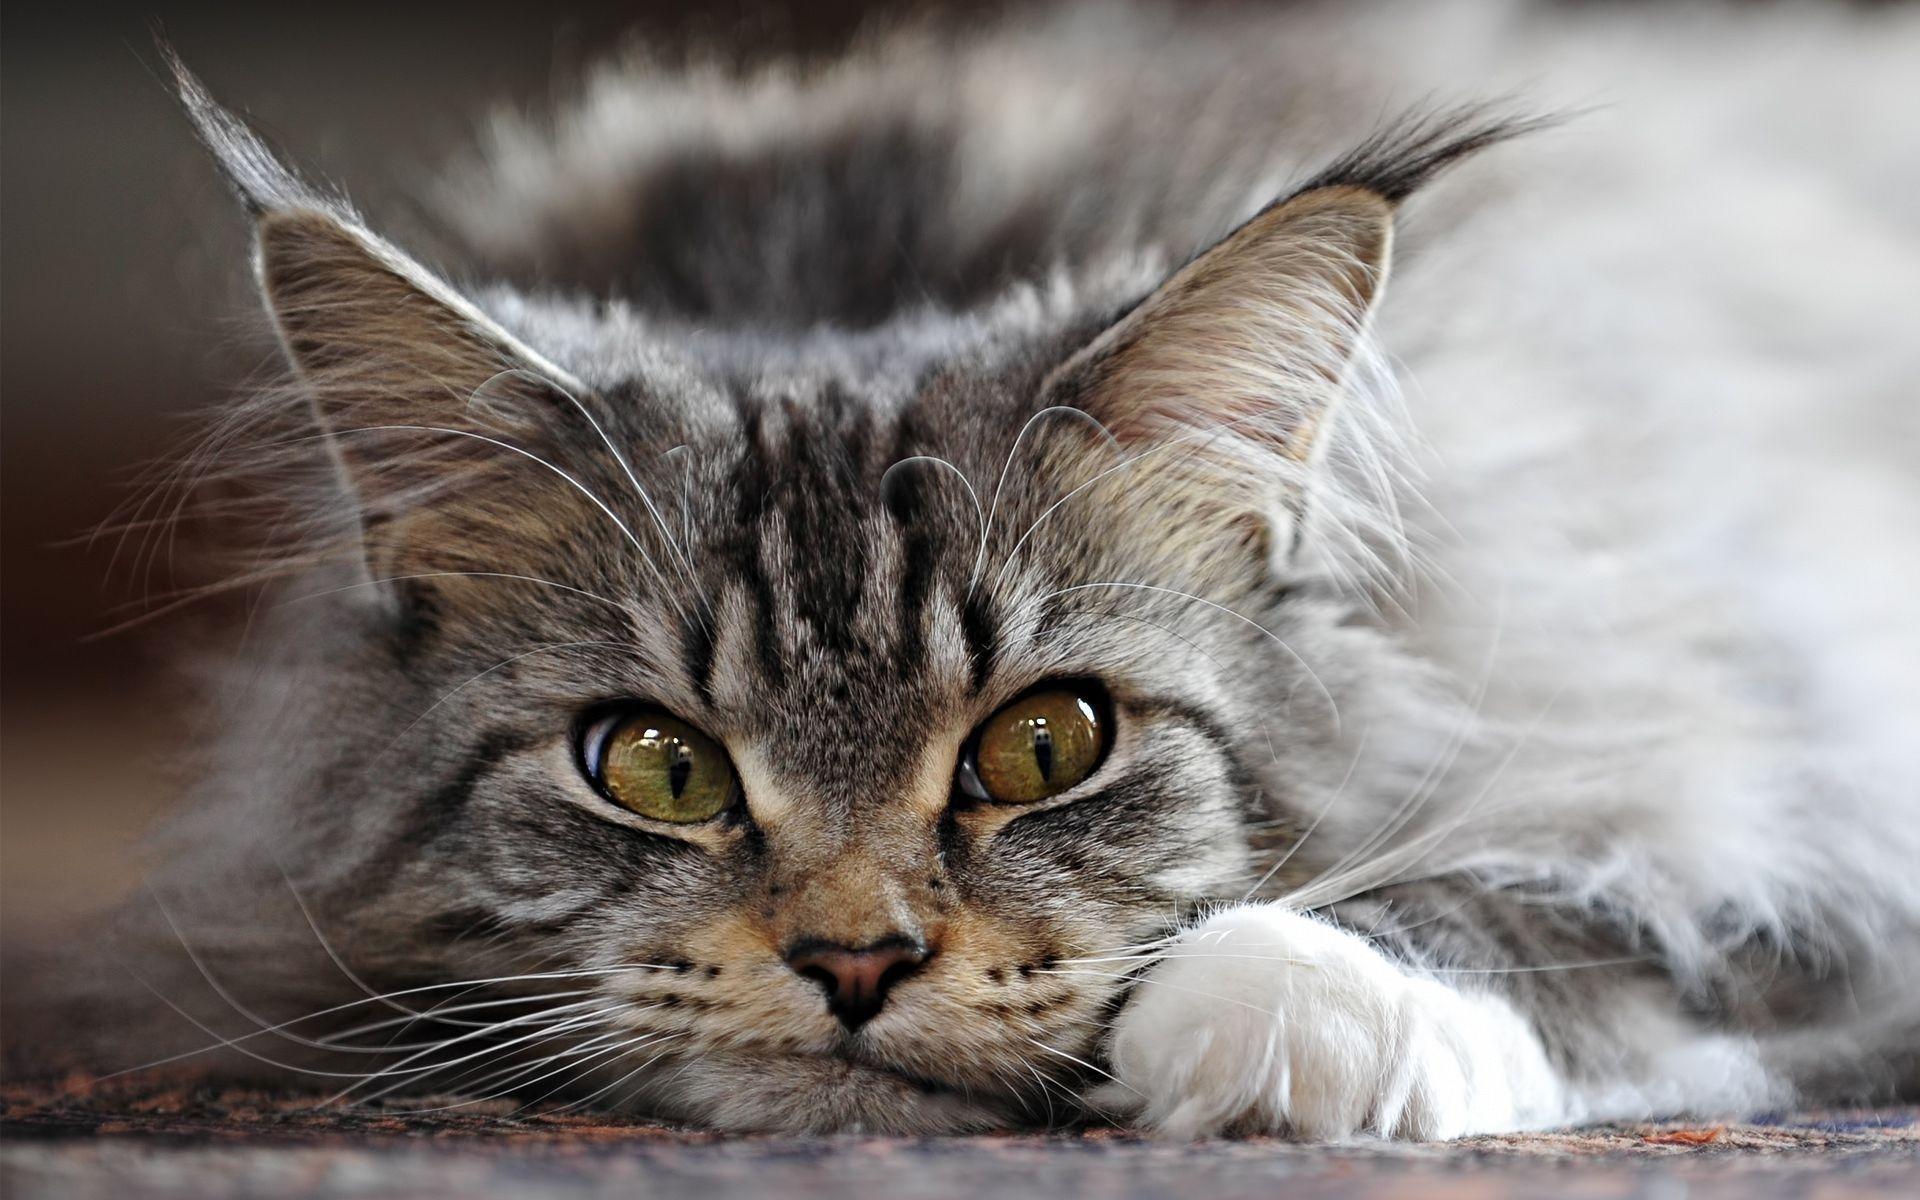 Charming Maine Coon face photo and wallpaper. Beautiful Charming